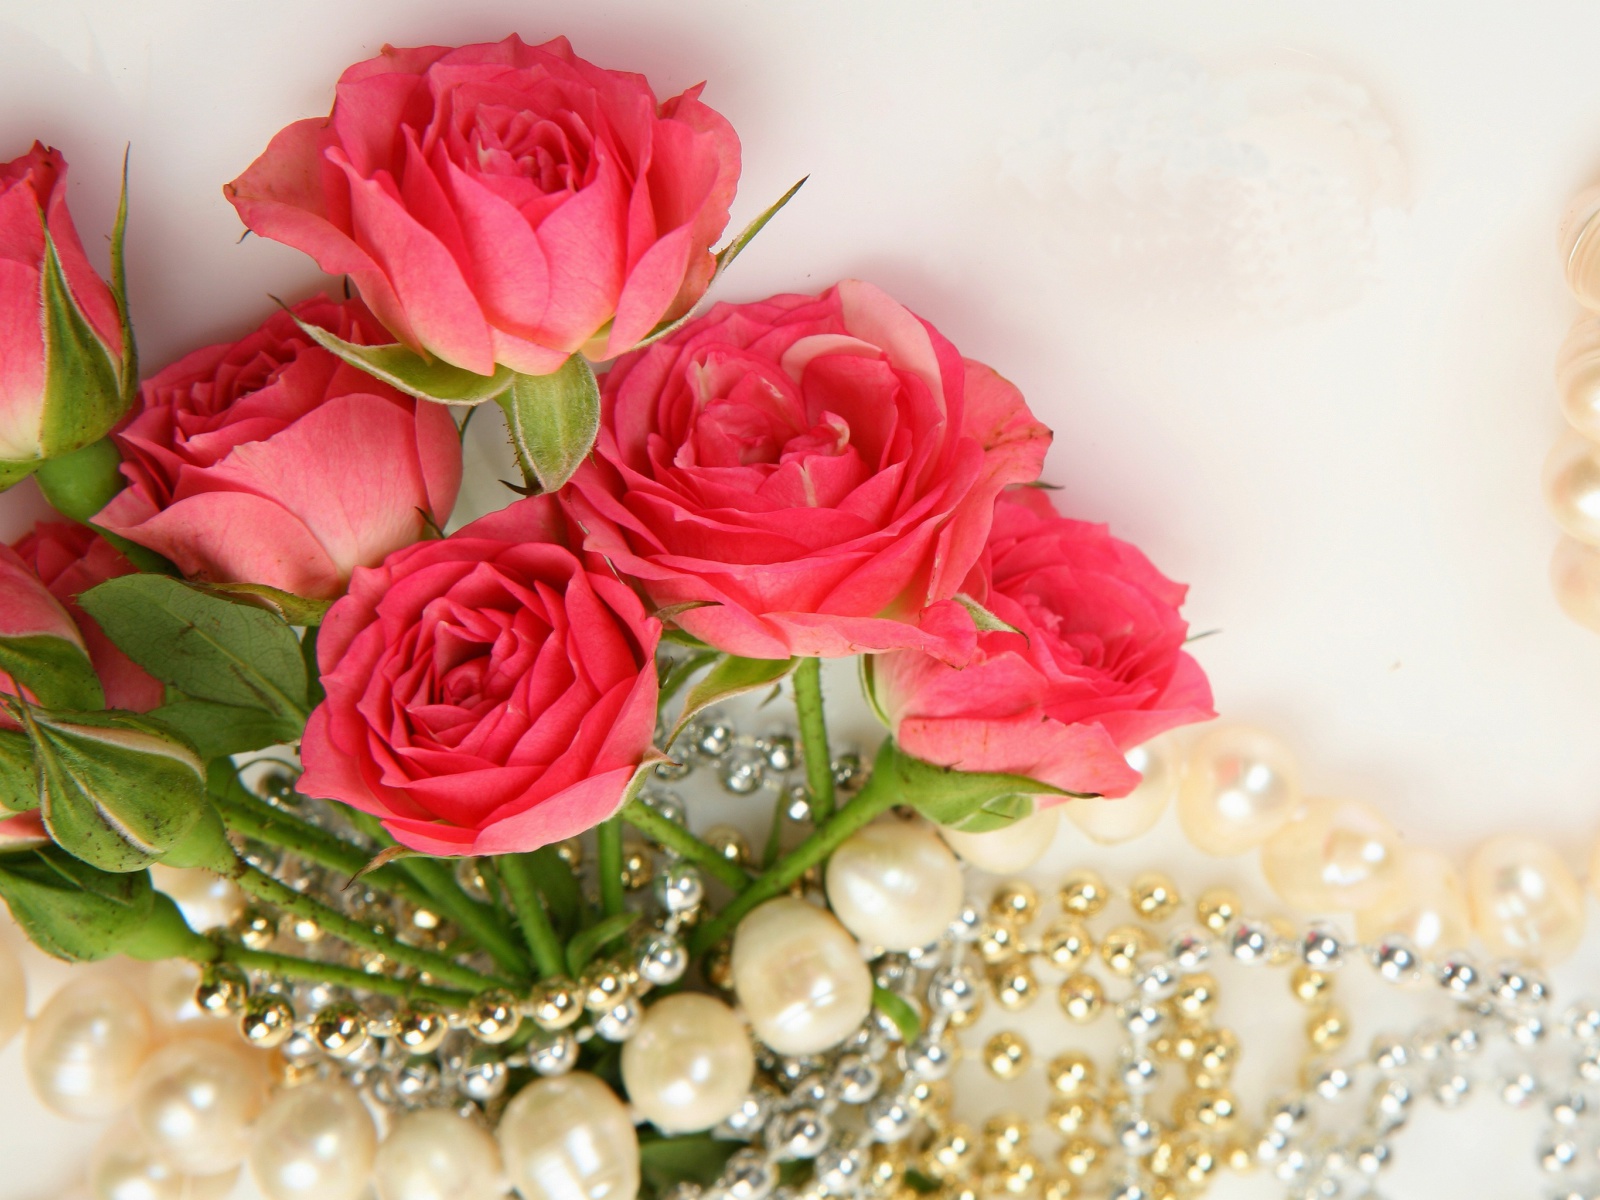 Necklace and Roses Bouquet screenshot #1 1600x1200